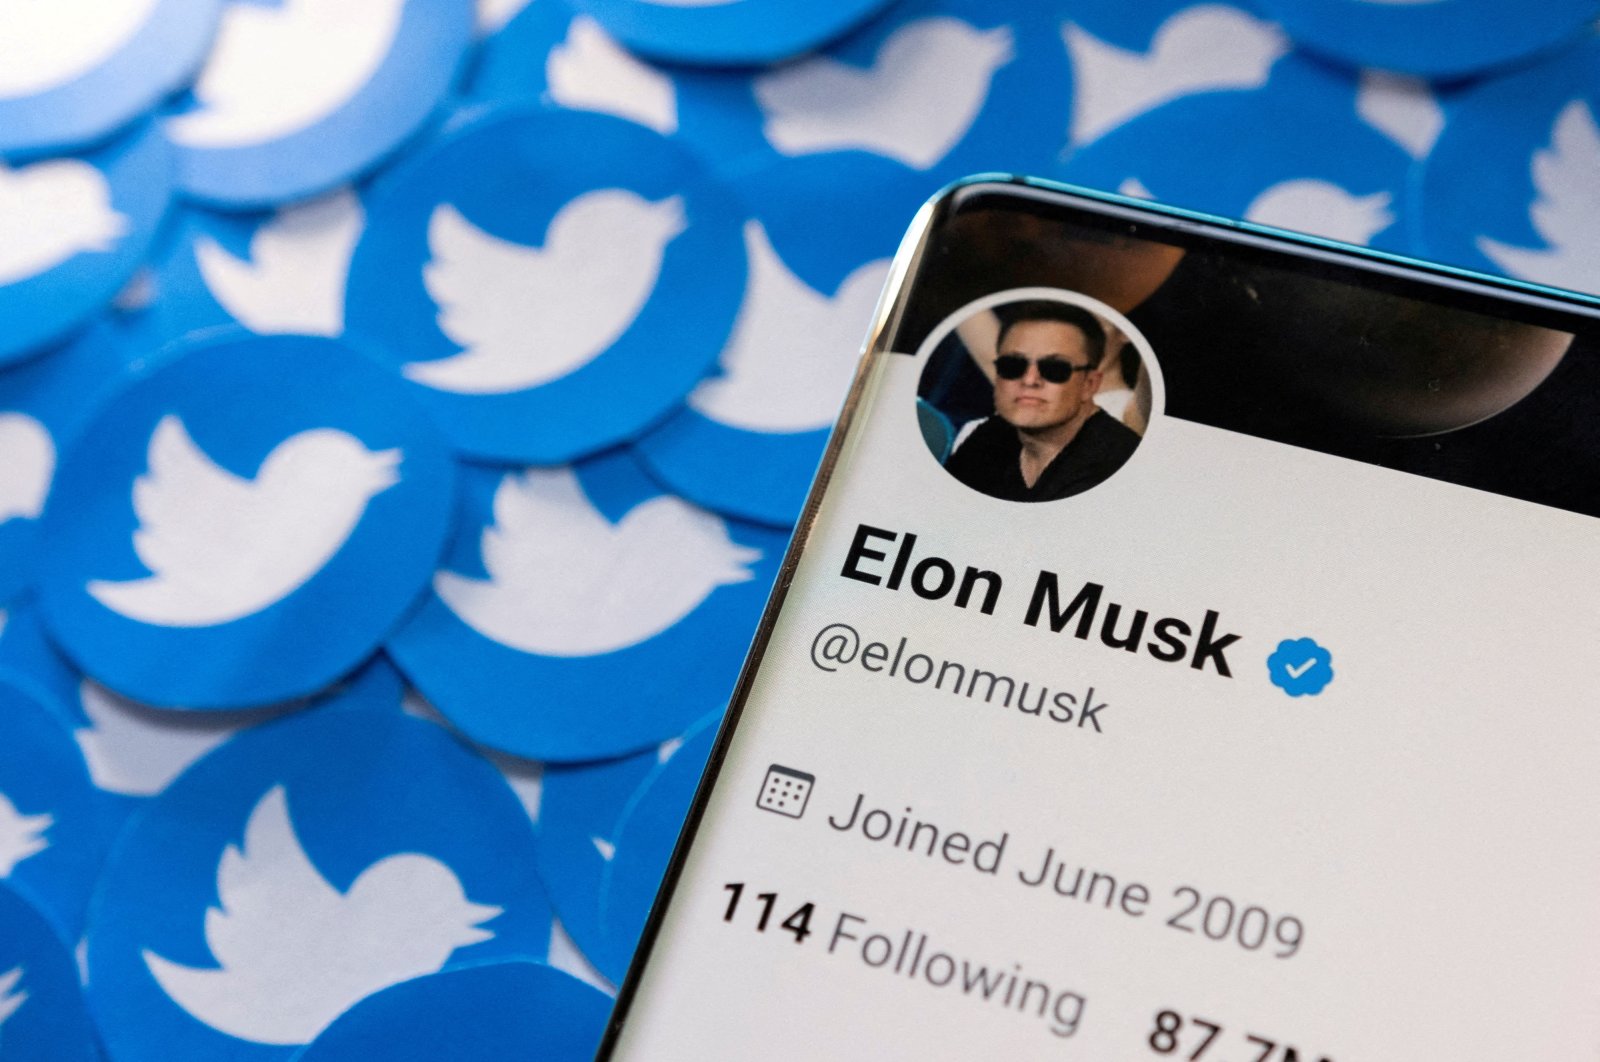 Elon Musk&#039;s Twitter profile is seen on a smartphone placed on printed Twitter logos in this picture illustration taken April 28, 2022. (Reuters Photo)